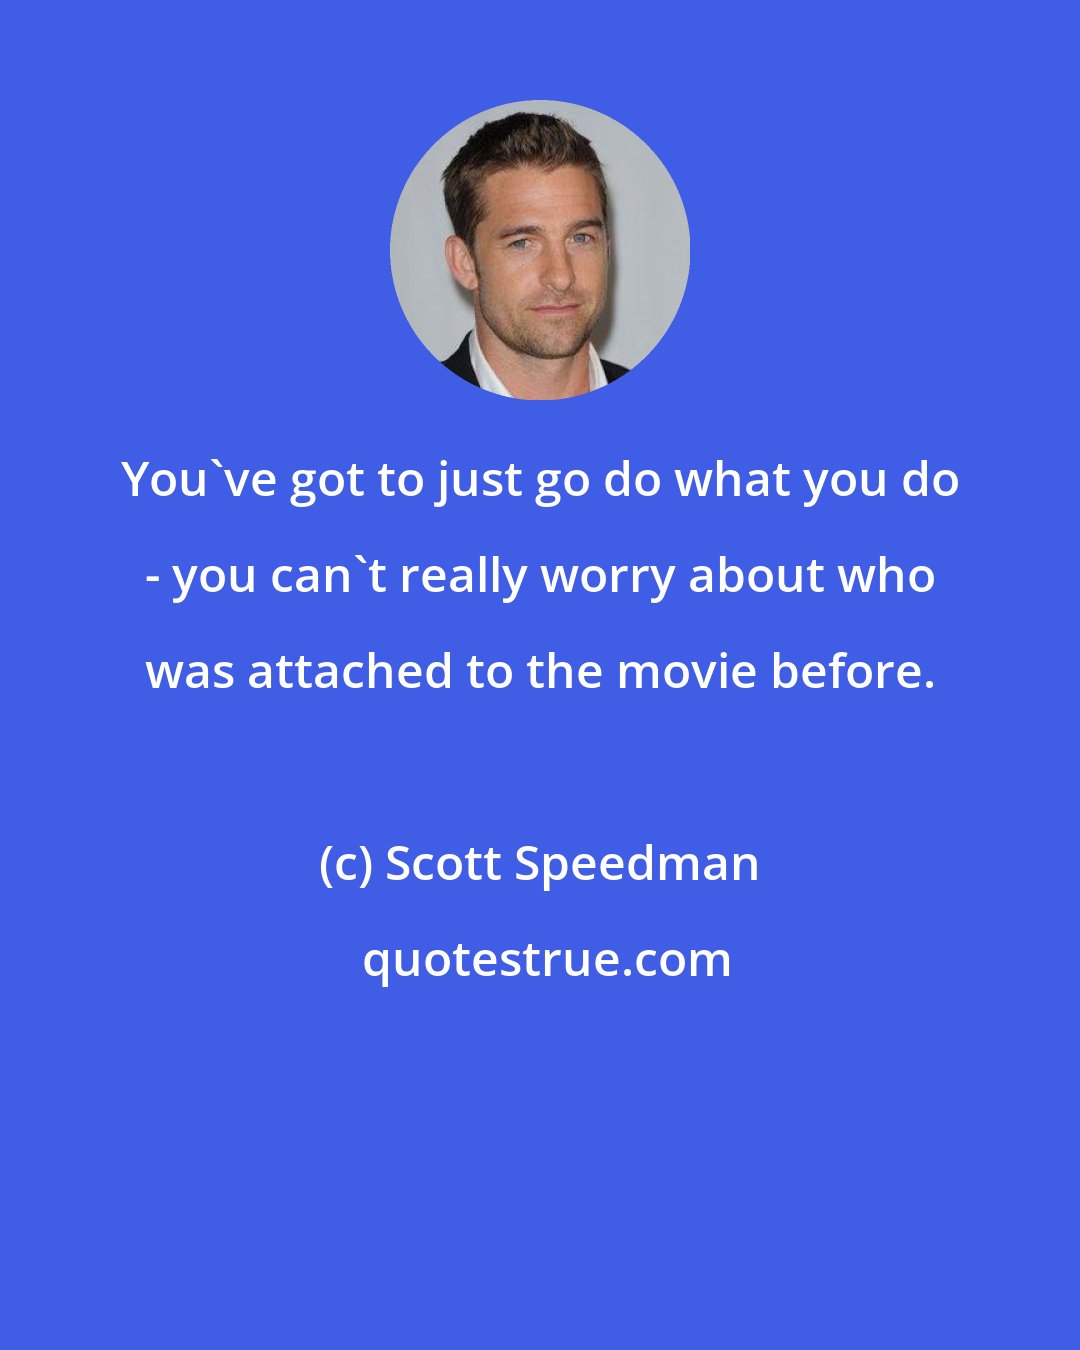 Scott Speedman: You've got to just go do what you do - you can't really worry about who was attached to the movie before.